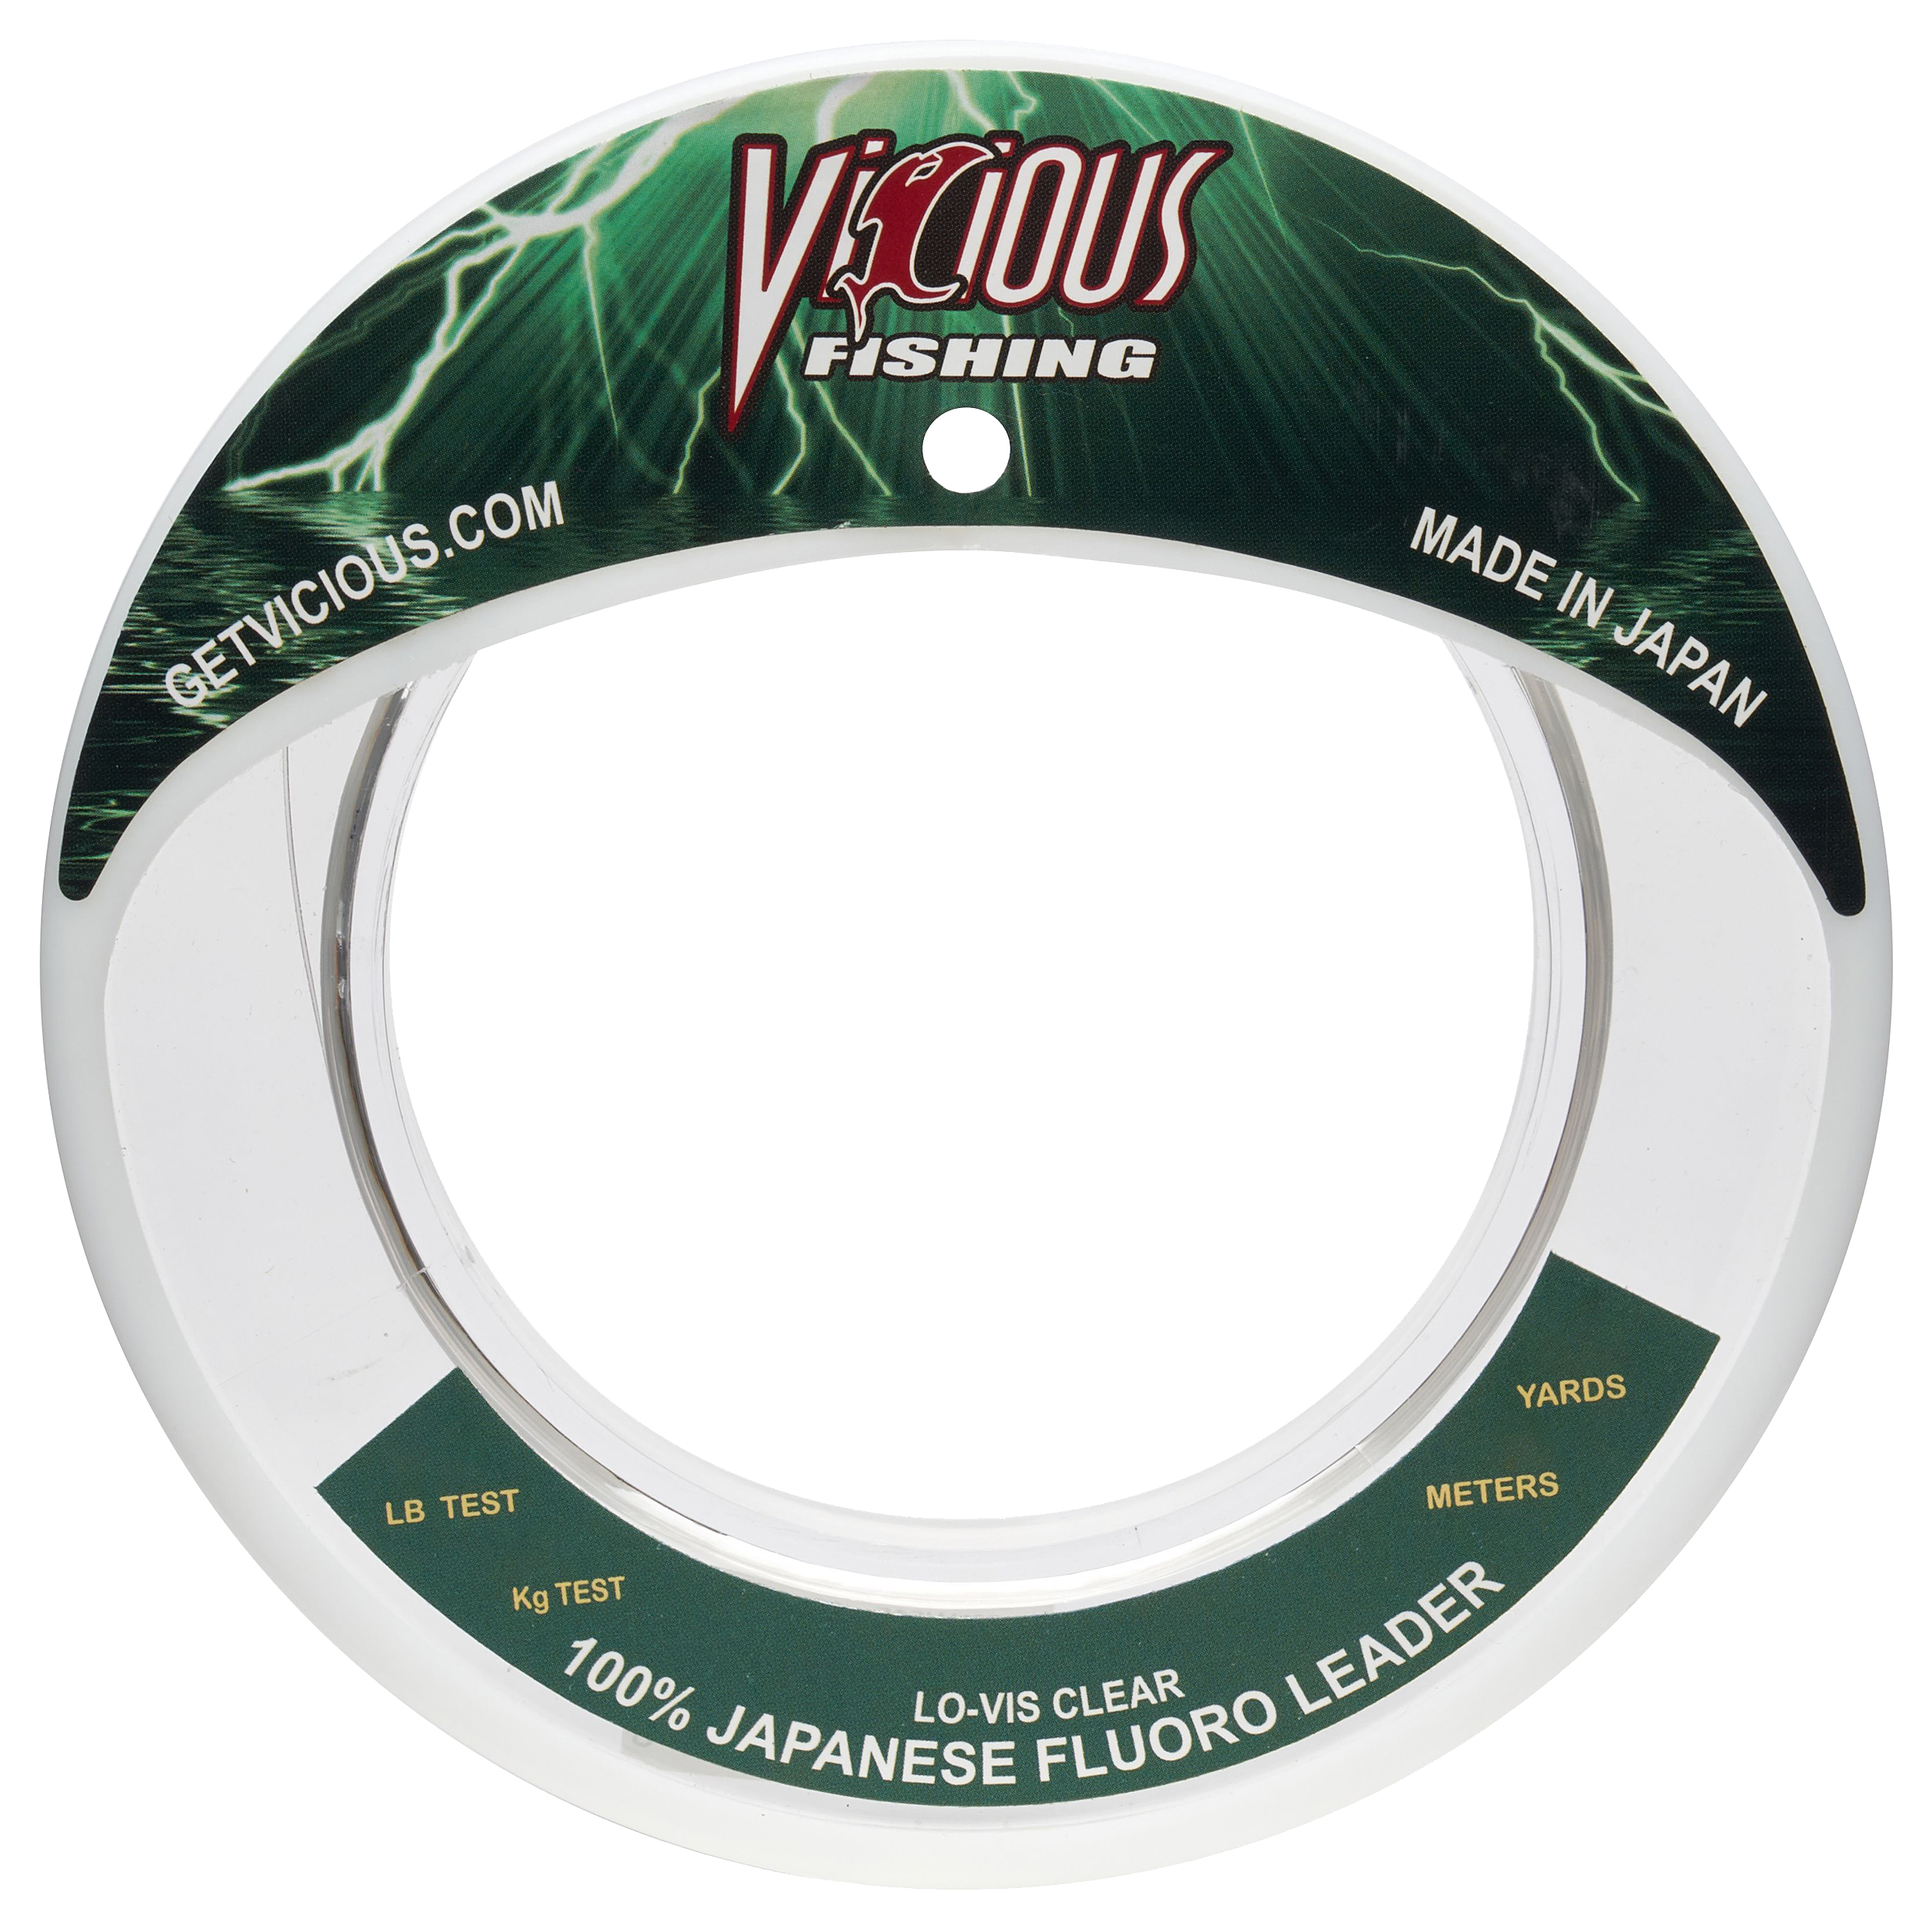 Vicious Fishing Fluorocarbon Leader